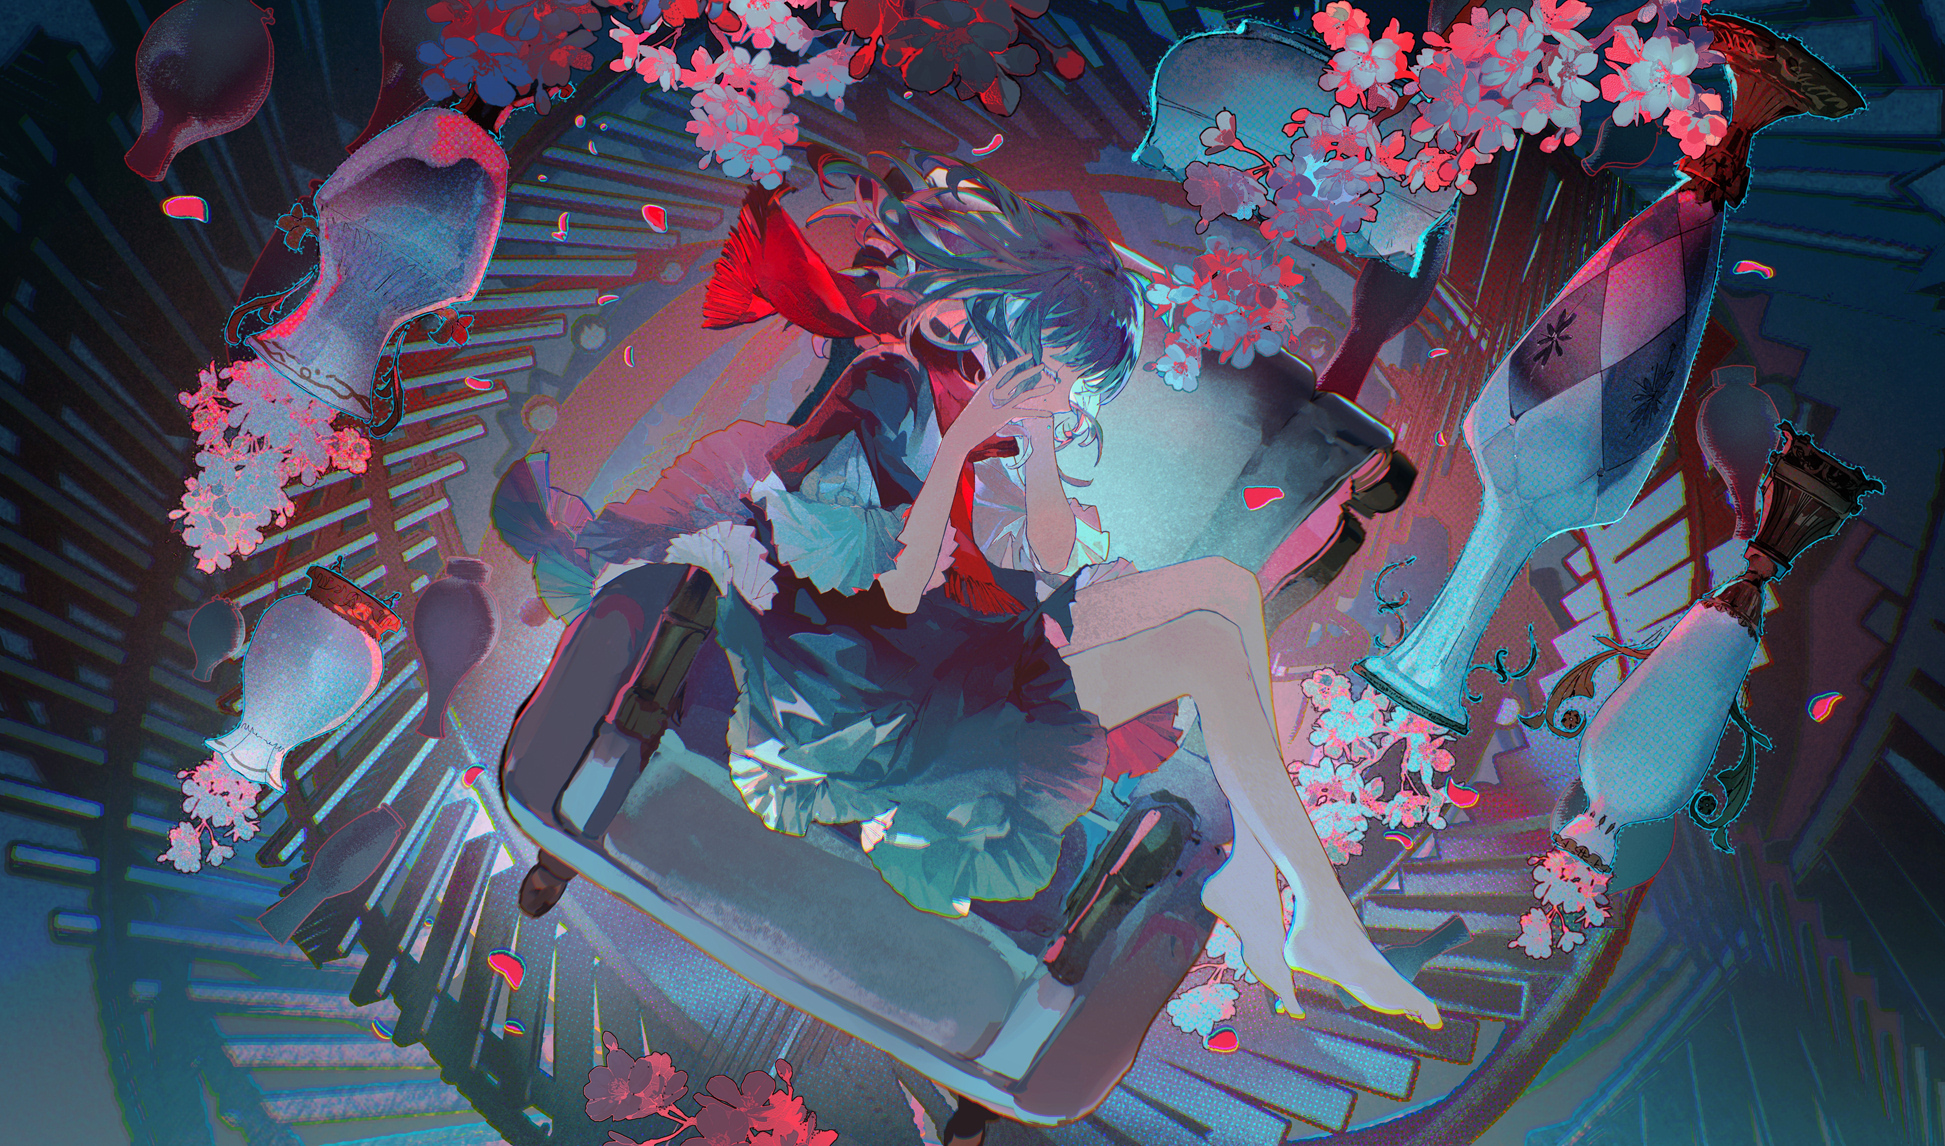 Anime Anime Girls Flowers Red Scarfs Closed Eyes Stairs Pink Flowers Vases Barefoot Petals 1945x1146